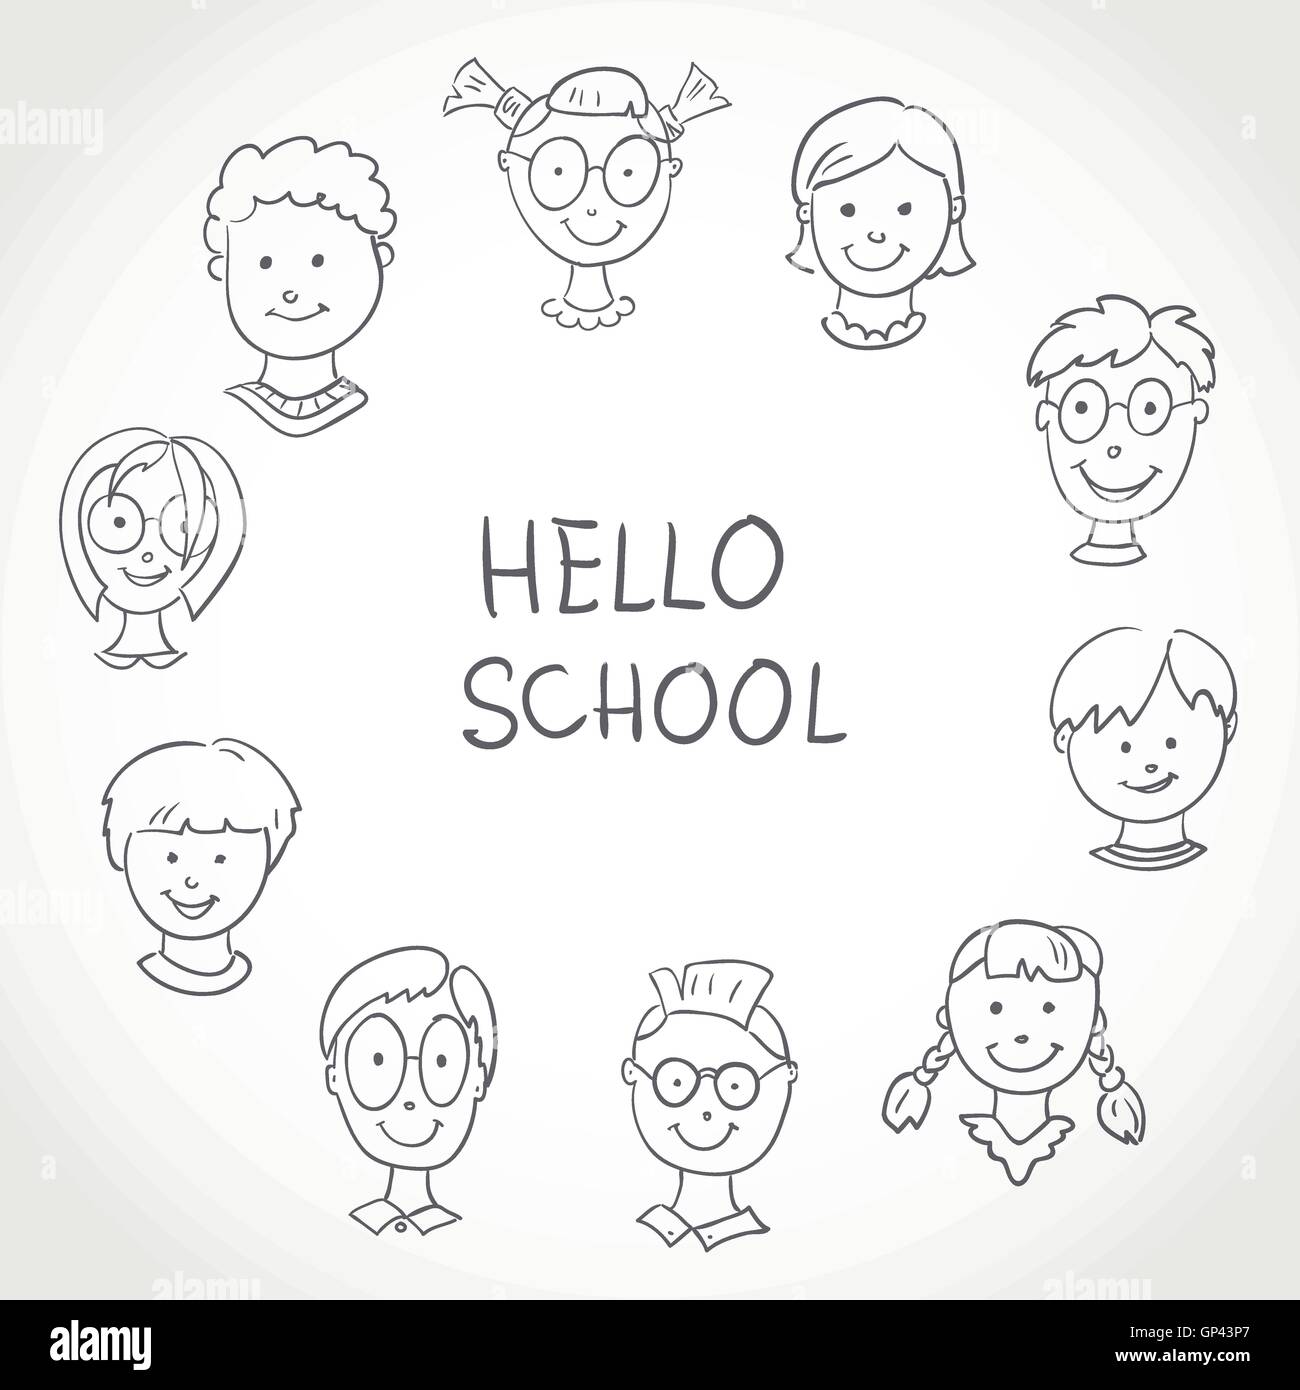 Parents with kids going to school design Vector Image